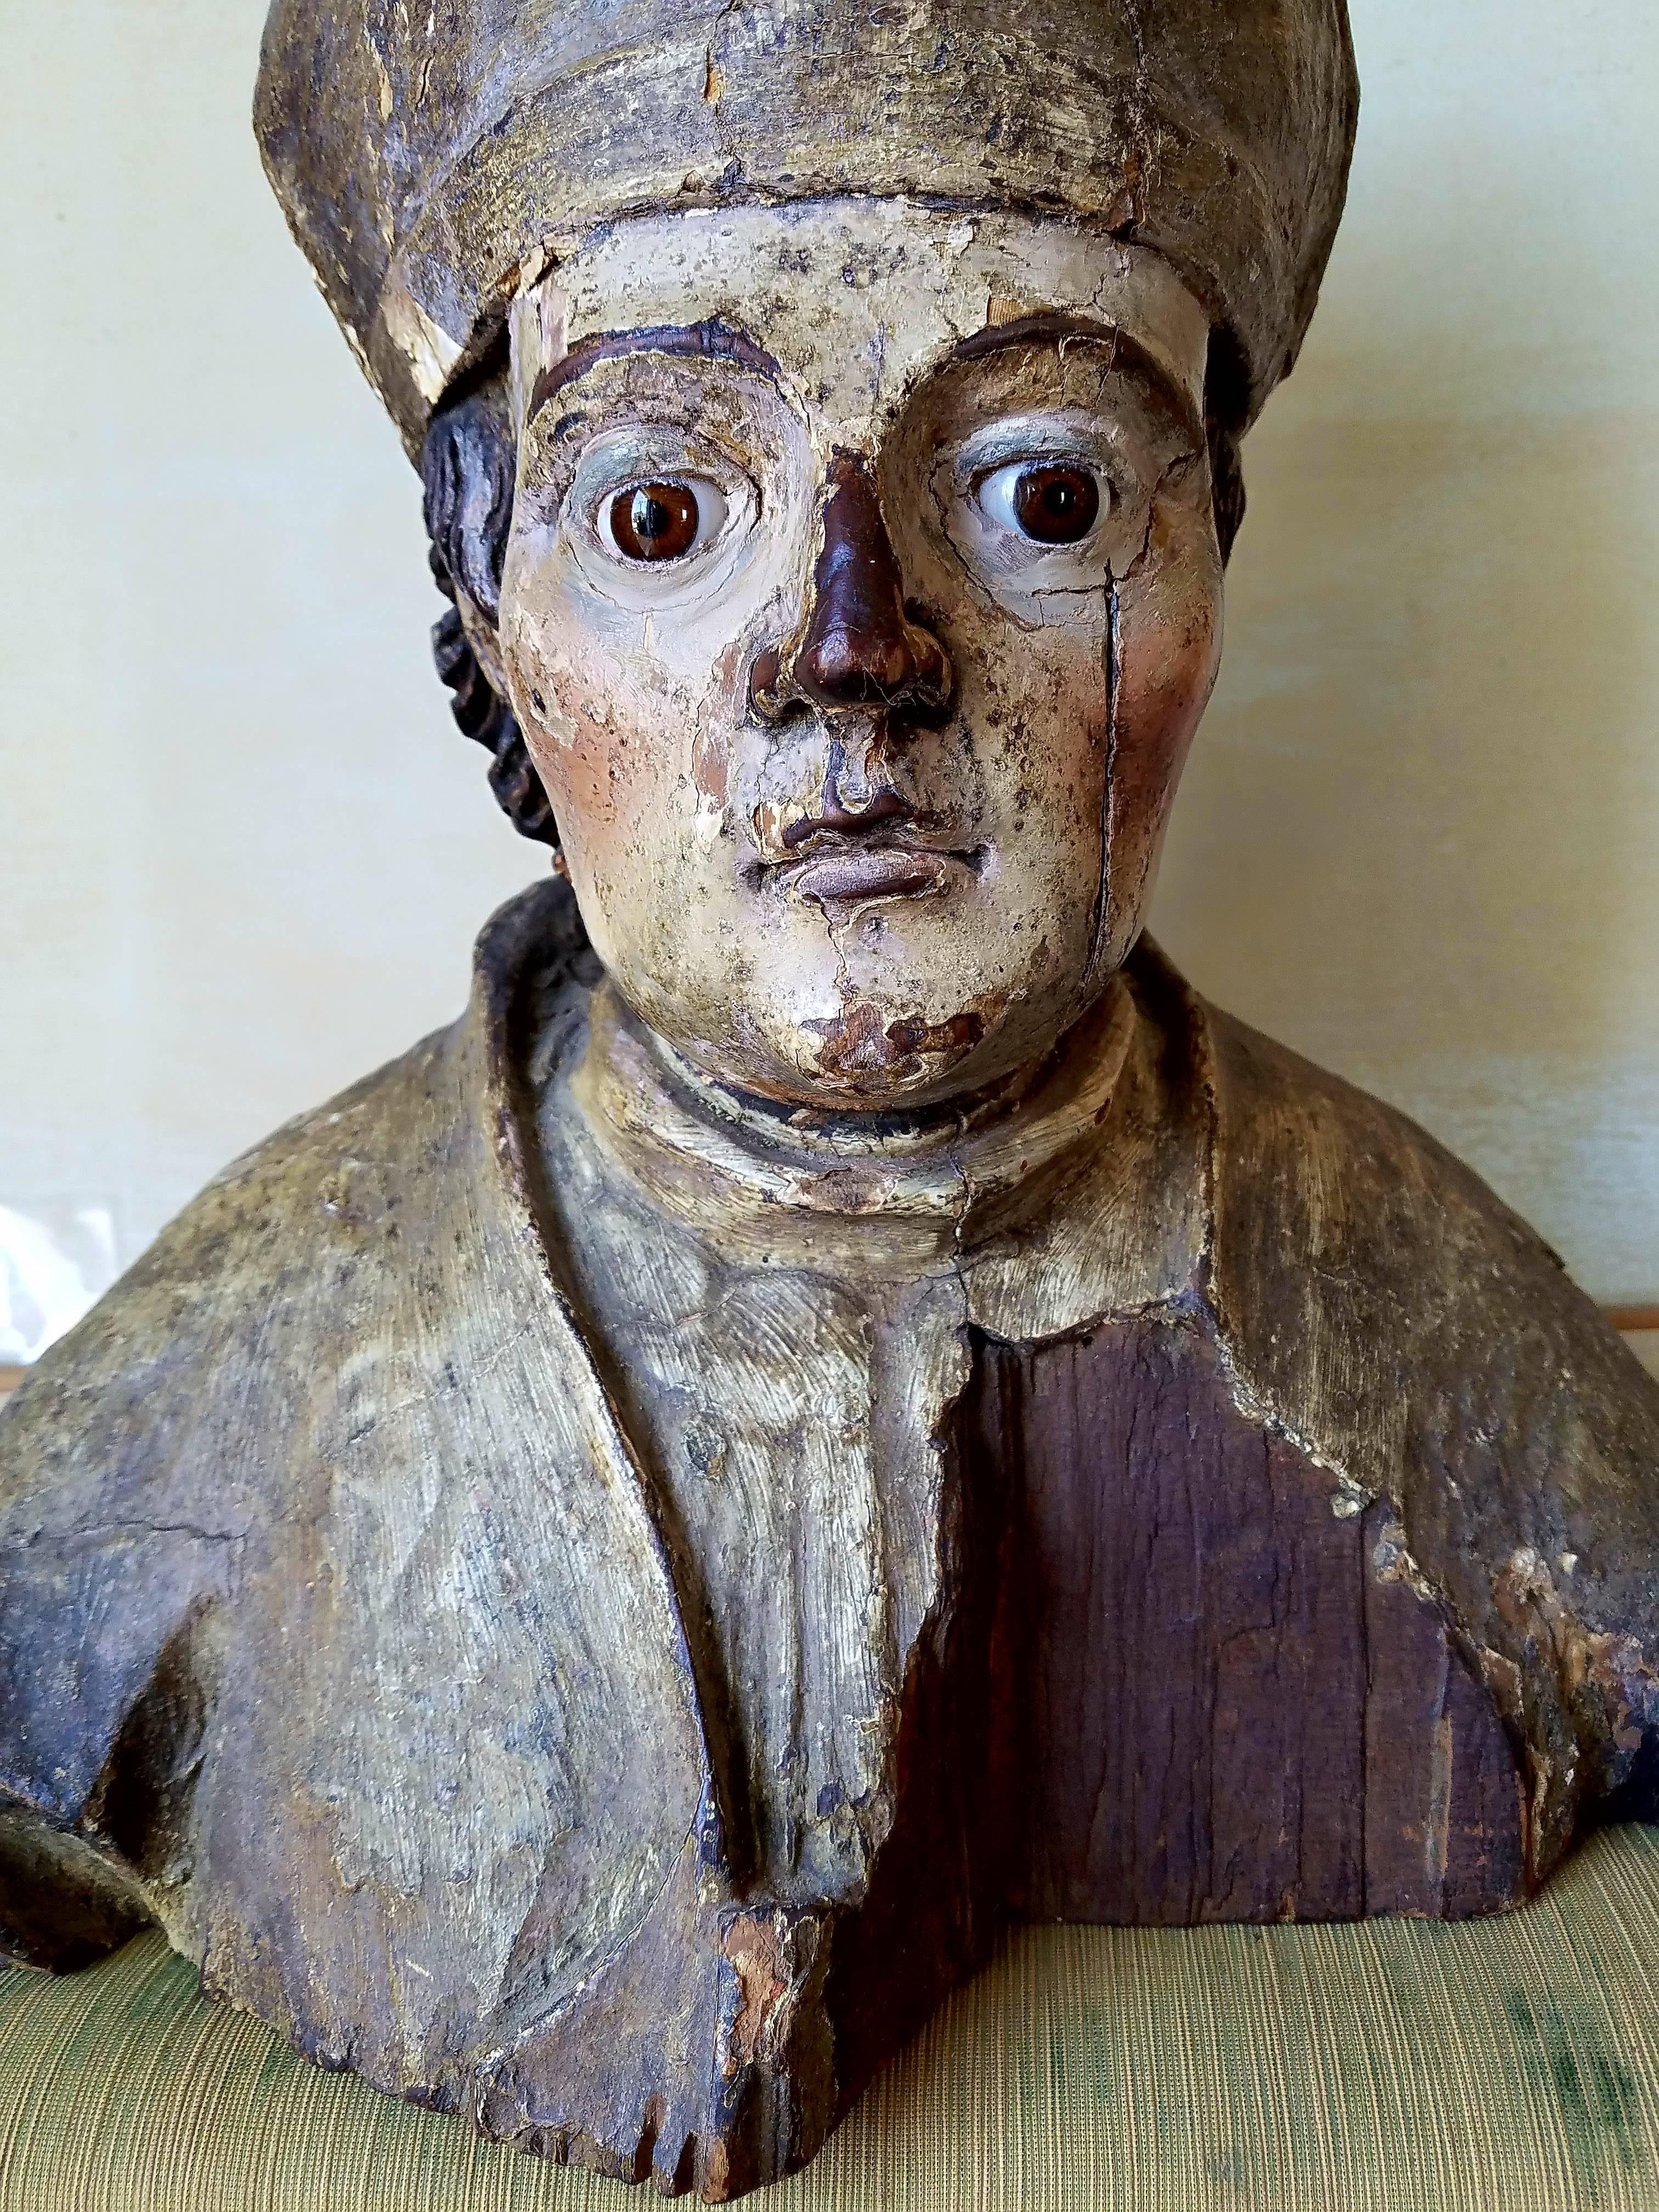 A very finely articulated carved French Bishop statue with very realistic glass eyes and painted face, cloak and hat. Wonderful patina and wear with deeply carved ears, hair and facial features. Paint is well kept with beautiful craquelure. Most